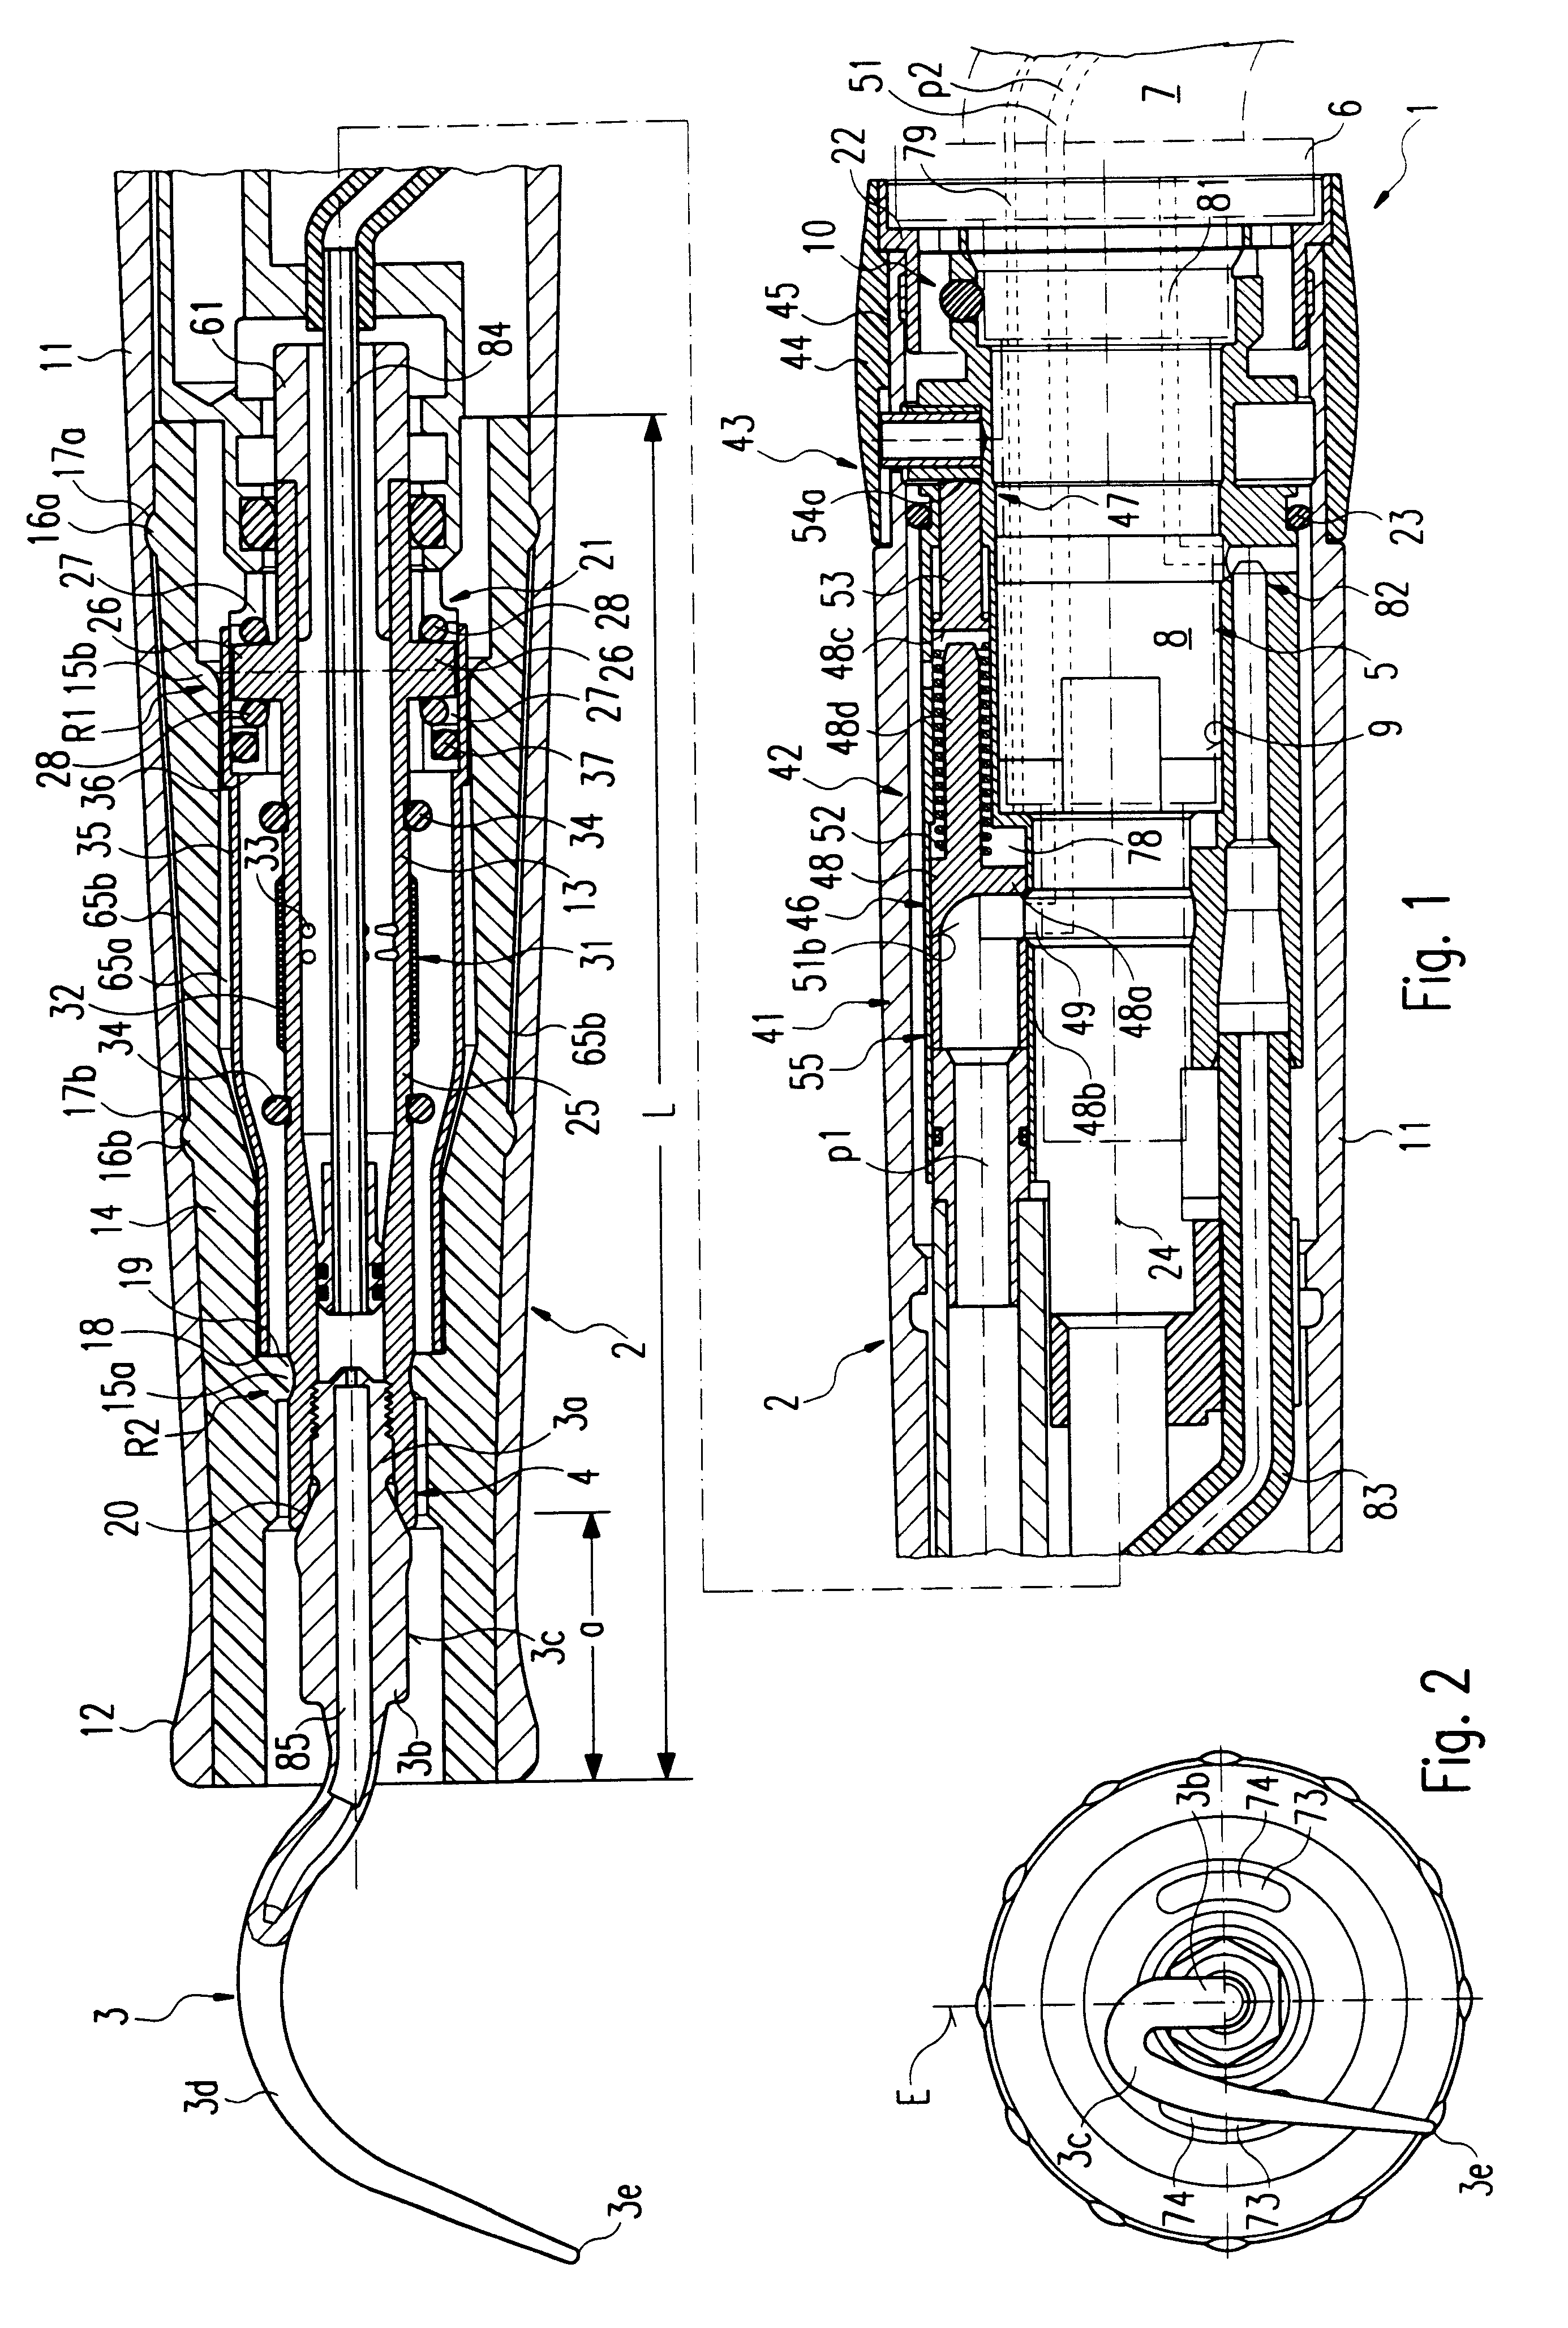 Medical and/or dental instrument with a pneumatic oscillatory